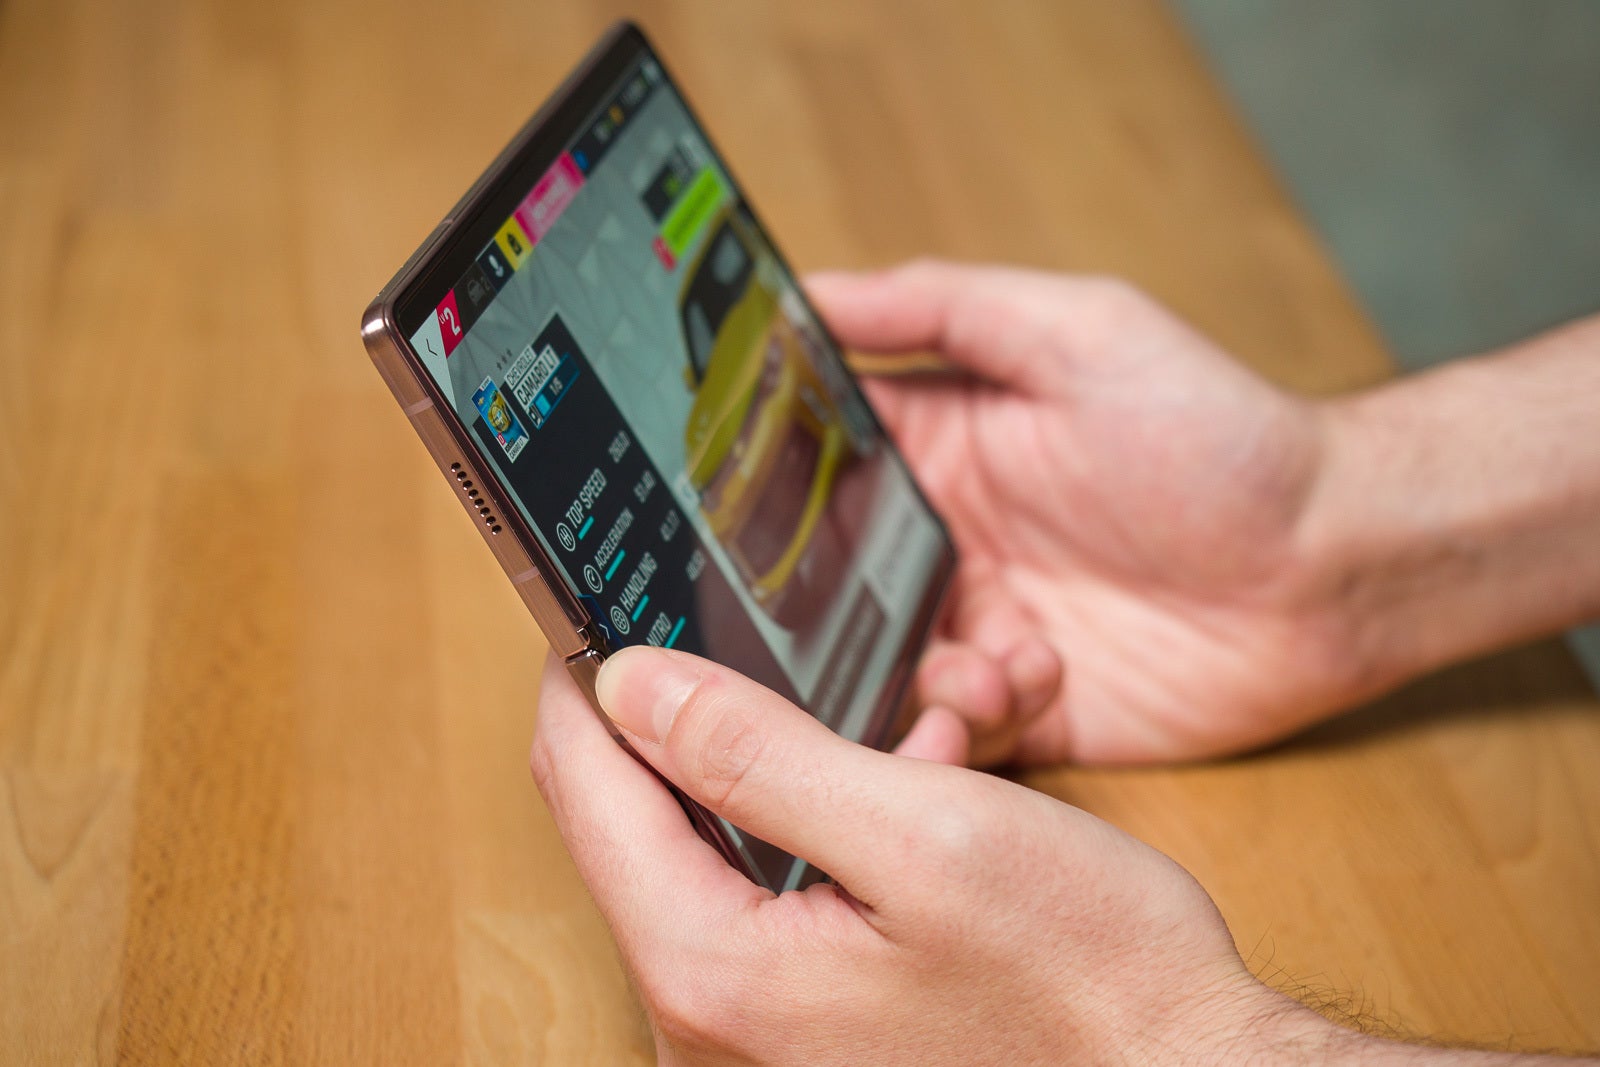 Samsung Galaxy Z Fold 2 long-term review: Still exciting?